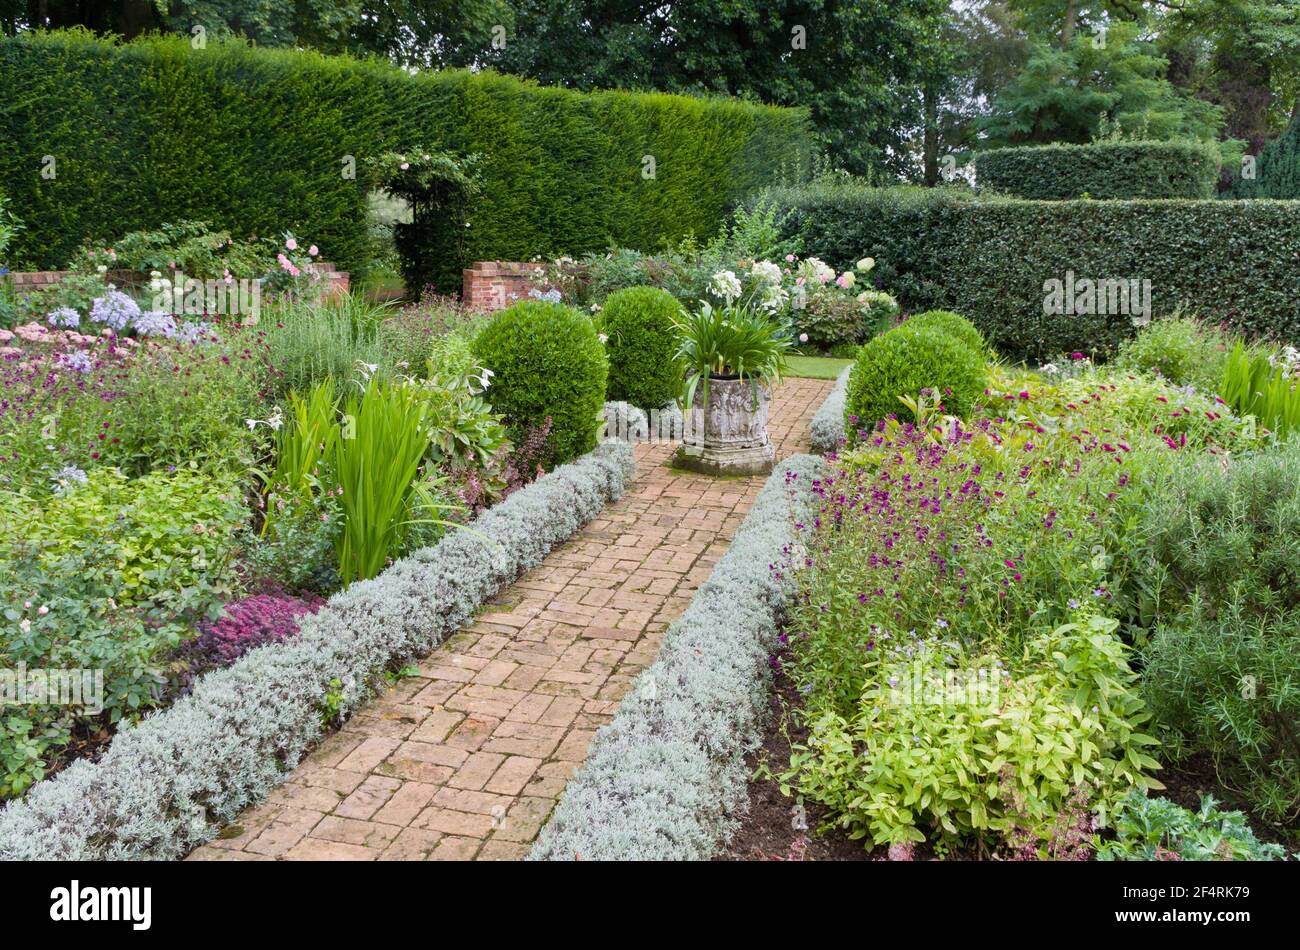 Paved path with herbaceous borders in summer, Coton Manor Gardens, Northamptonshire, UK Stock Photo